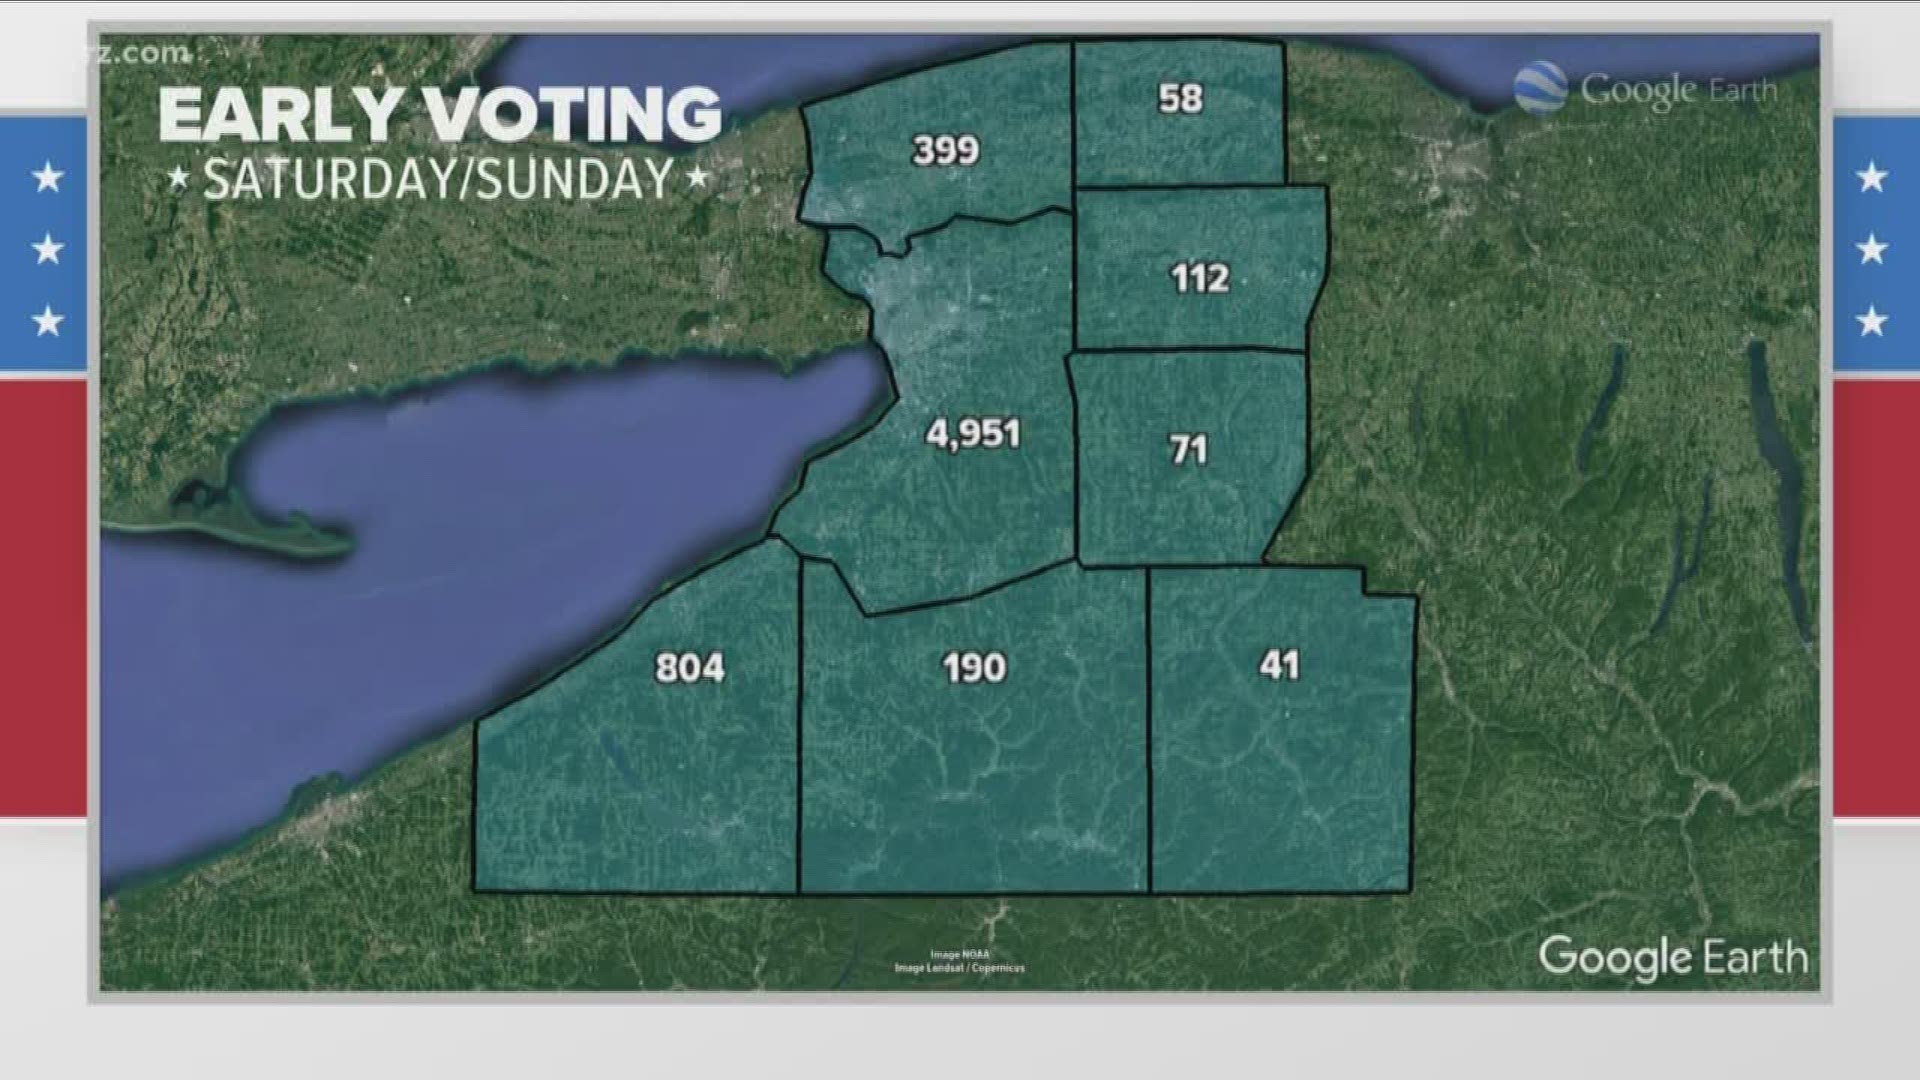 On Saturday, the first day for Early Voting, more people cast ballots in Erie County than any county in the state, including in New York City.